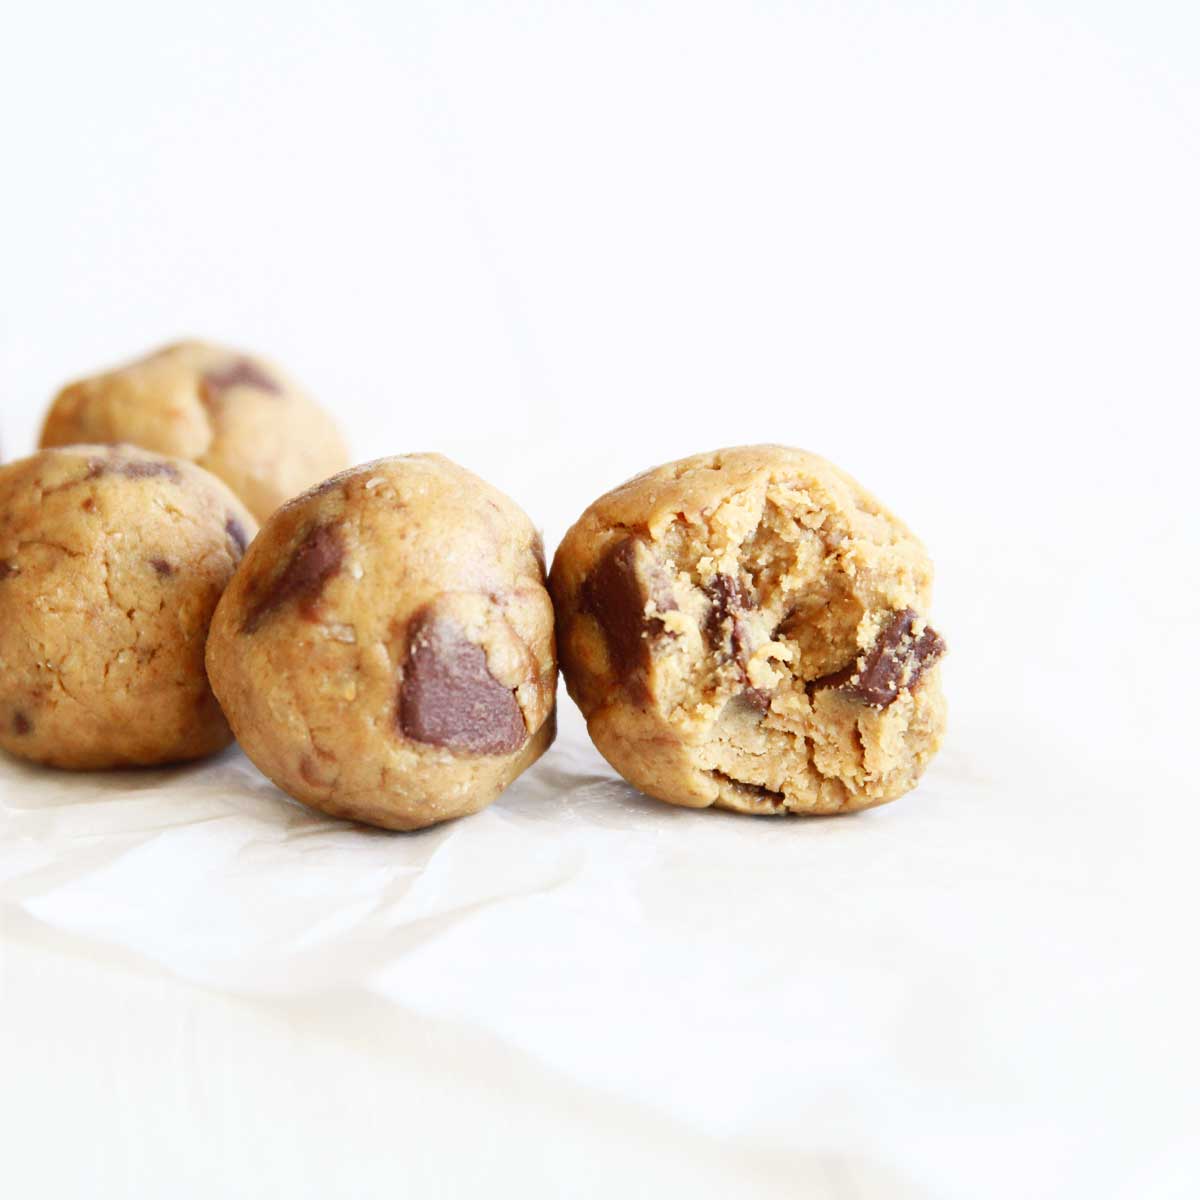 Peanut Butter Cookie Dough Protein Balls (No-Bake, Vegan Recipe with Oats) - Red Bean Mochi Cake